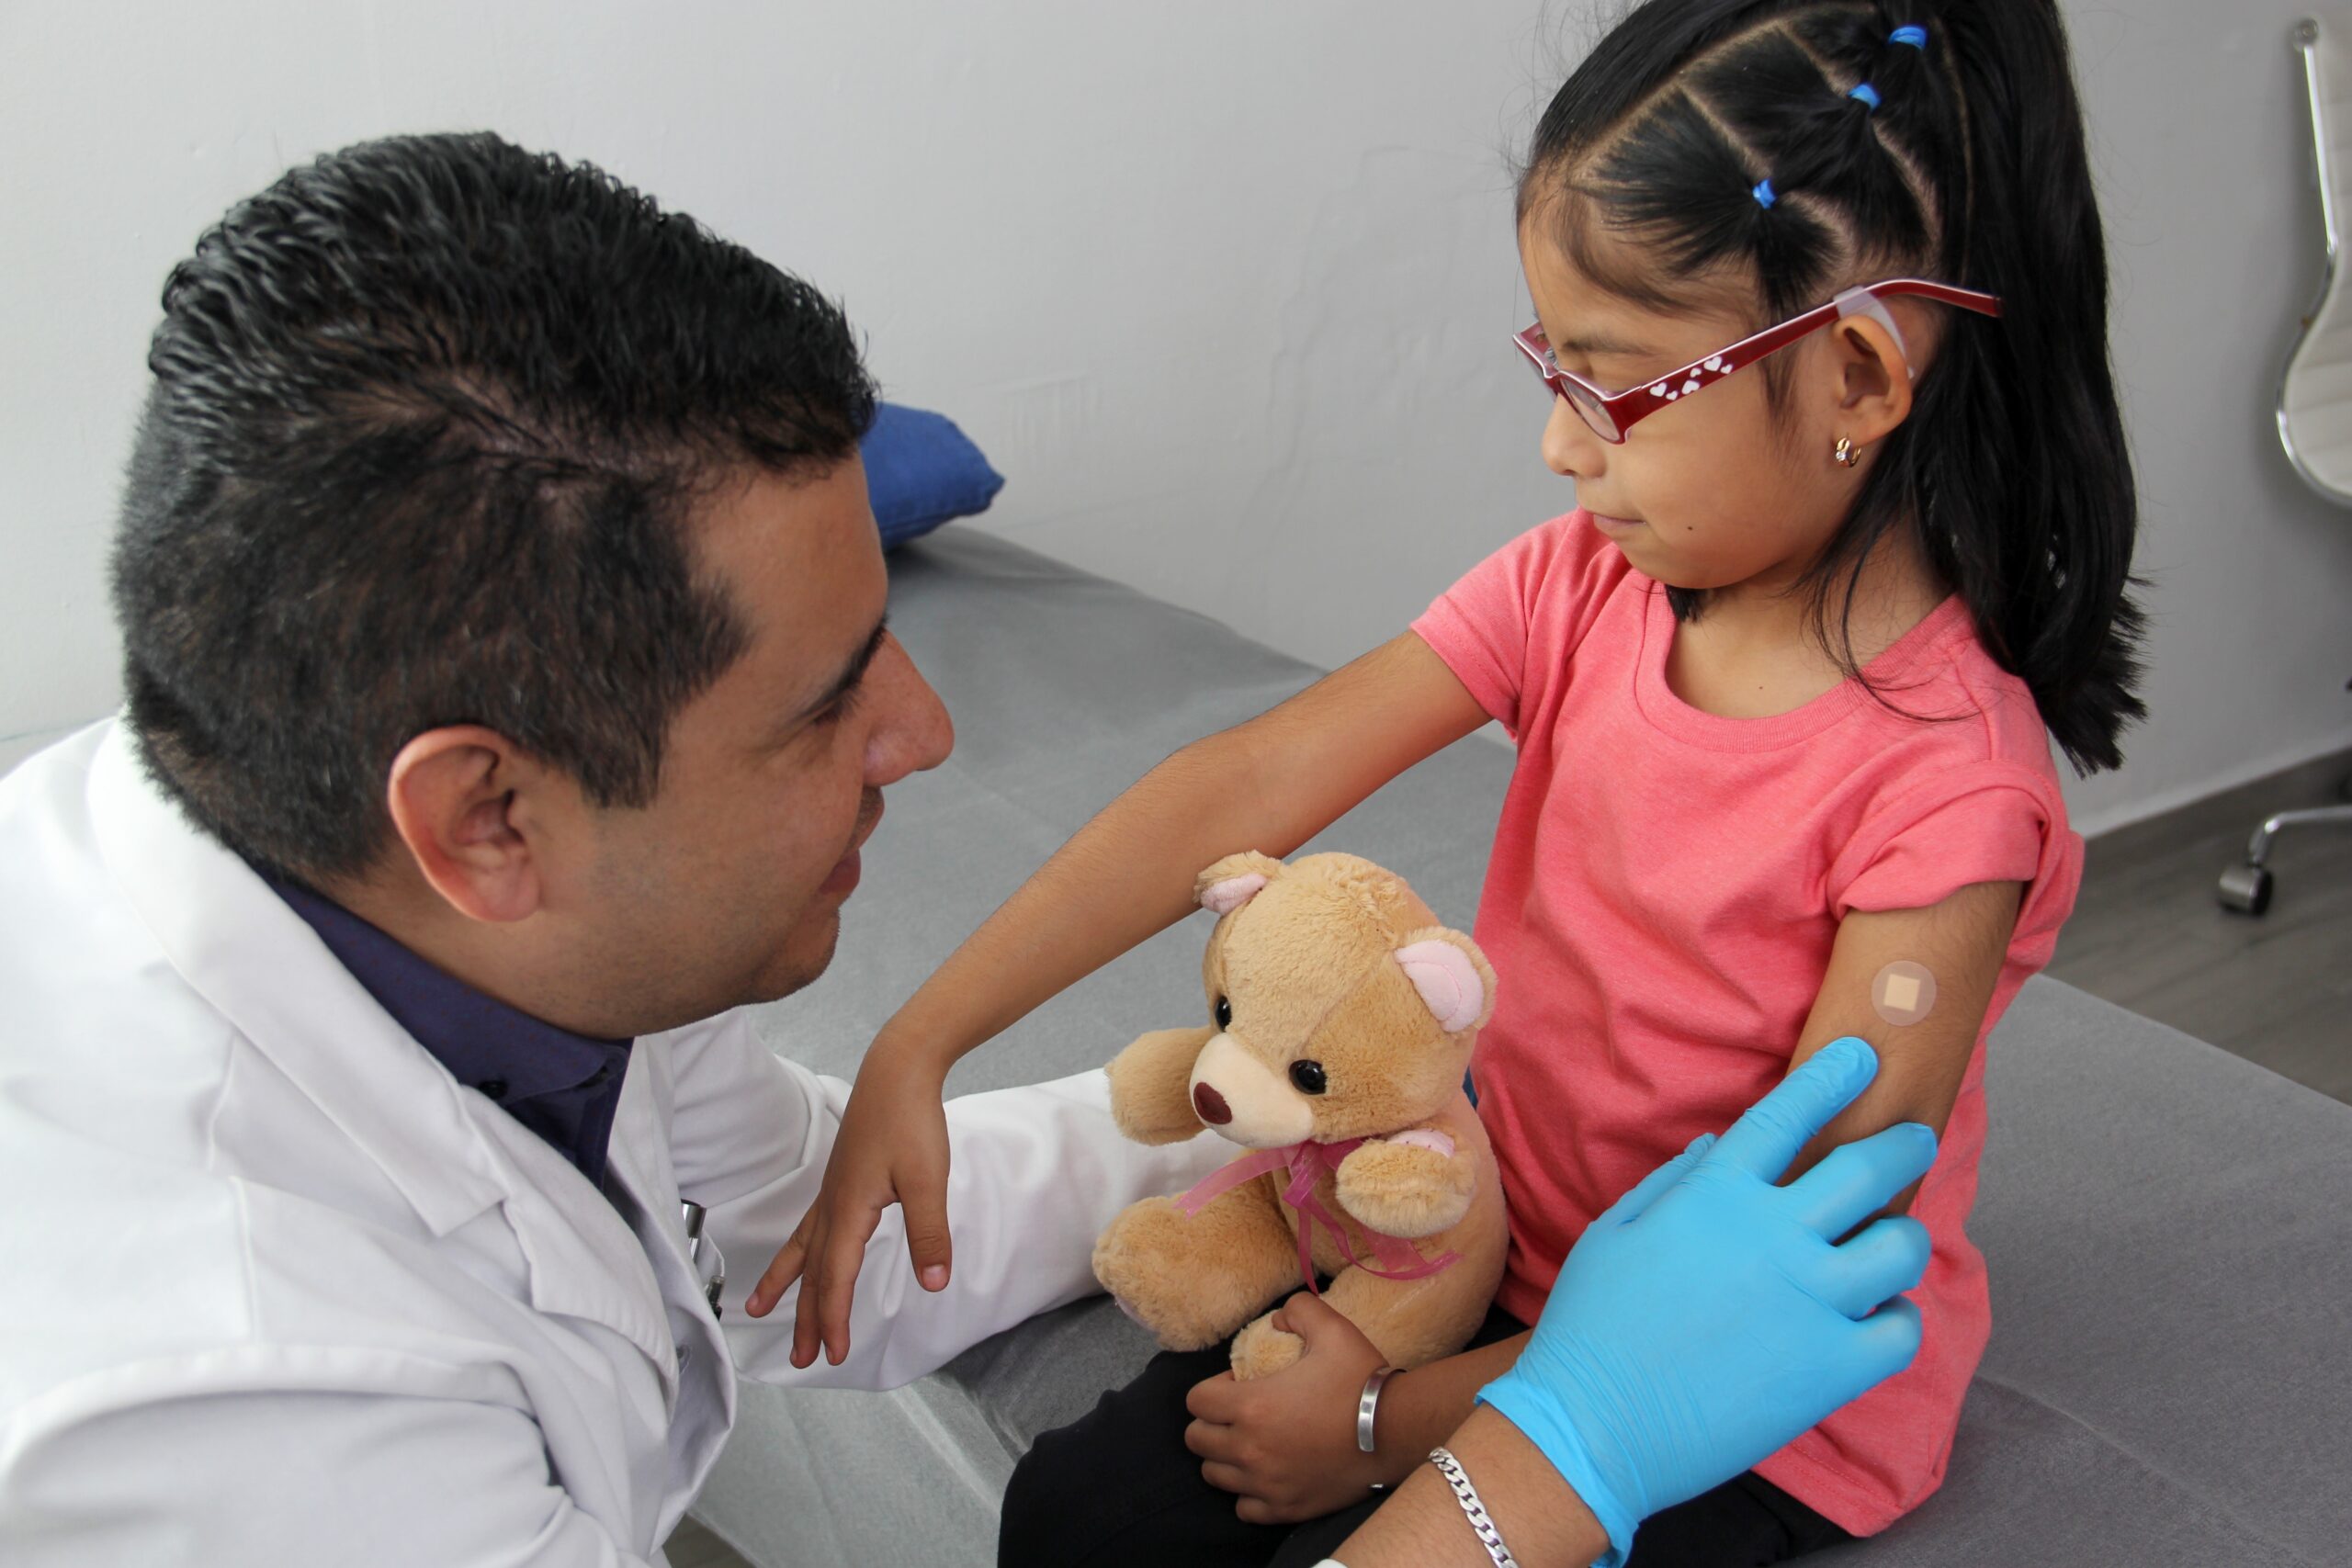 Young girl at the doctor with her teddy bear